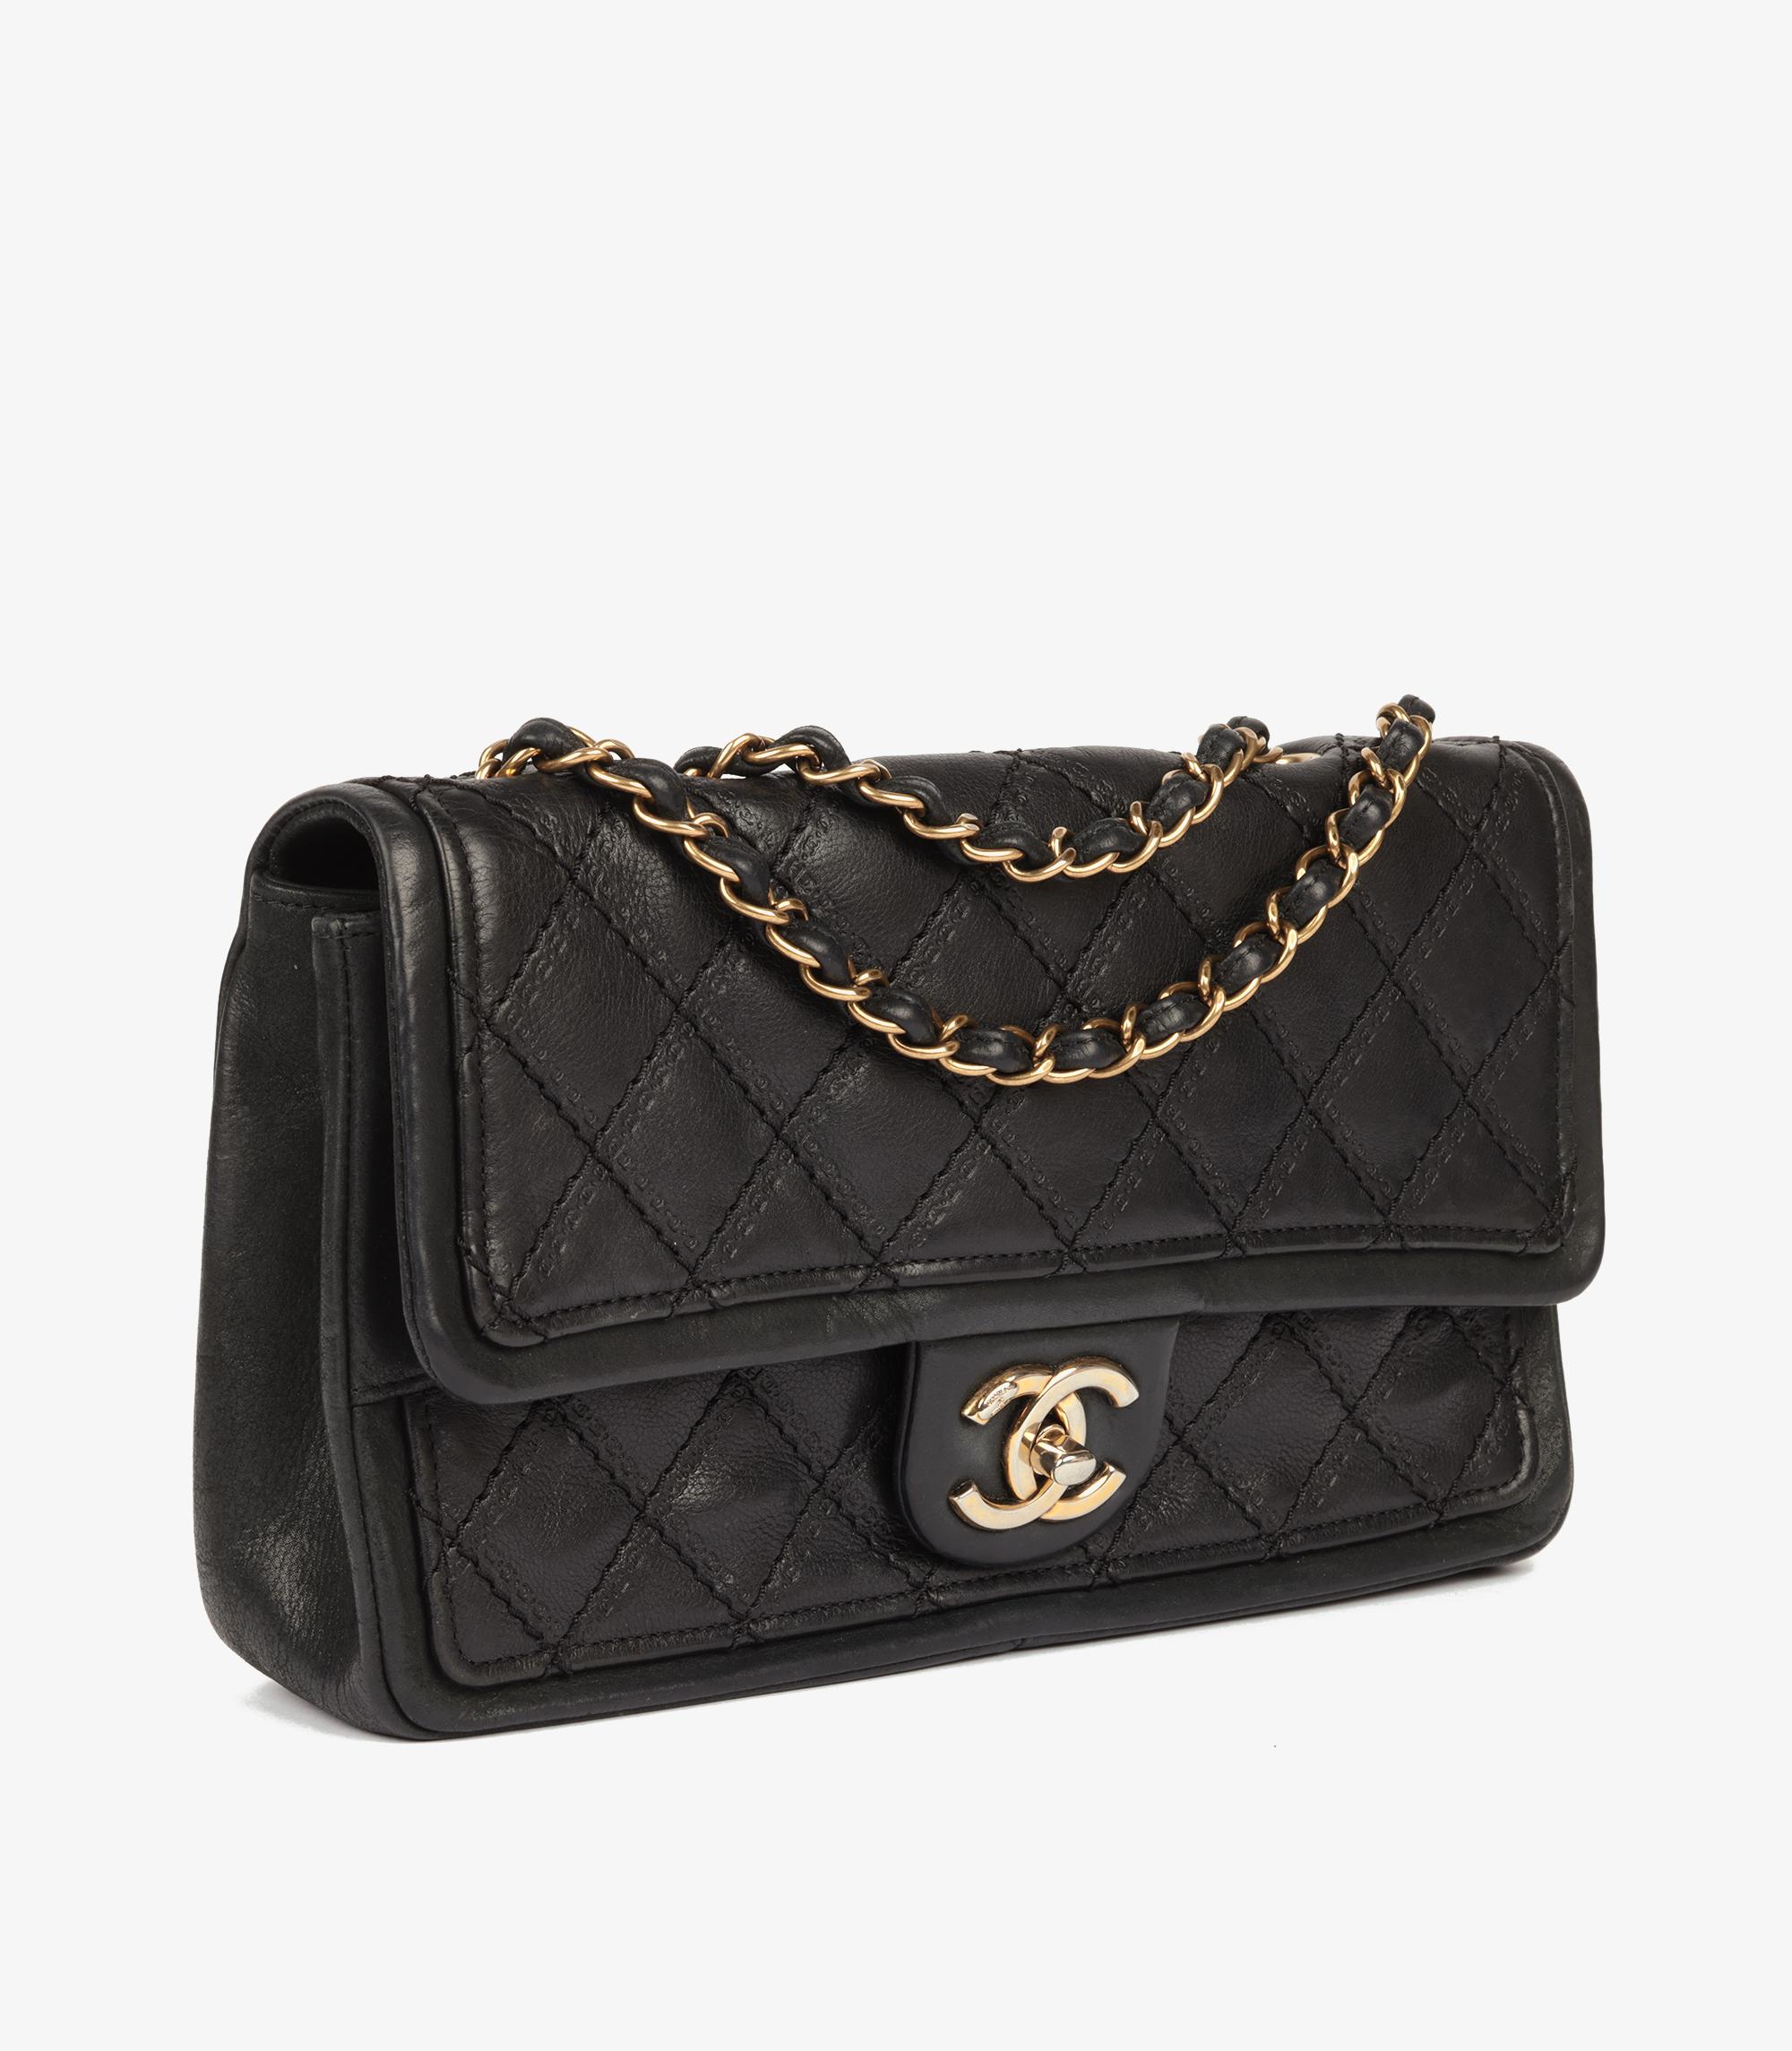 Chanel Black Quilted Iridescent Calfskin Leather Sheriff Star Single Flag Bag In Good Condition For Sale In Bishop's Stortford, Hertfordshire